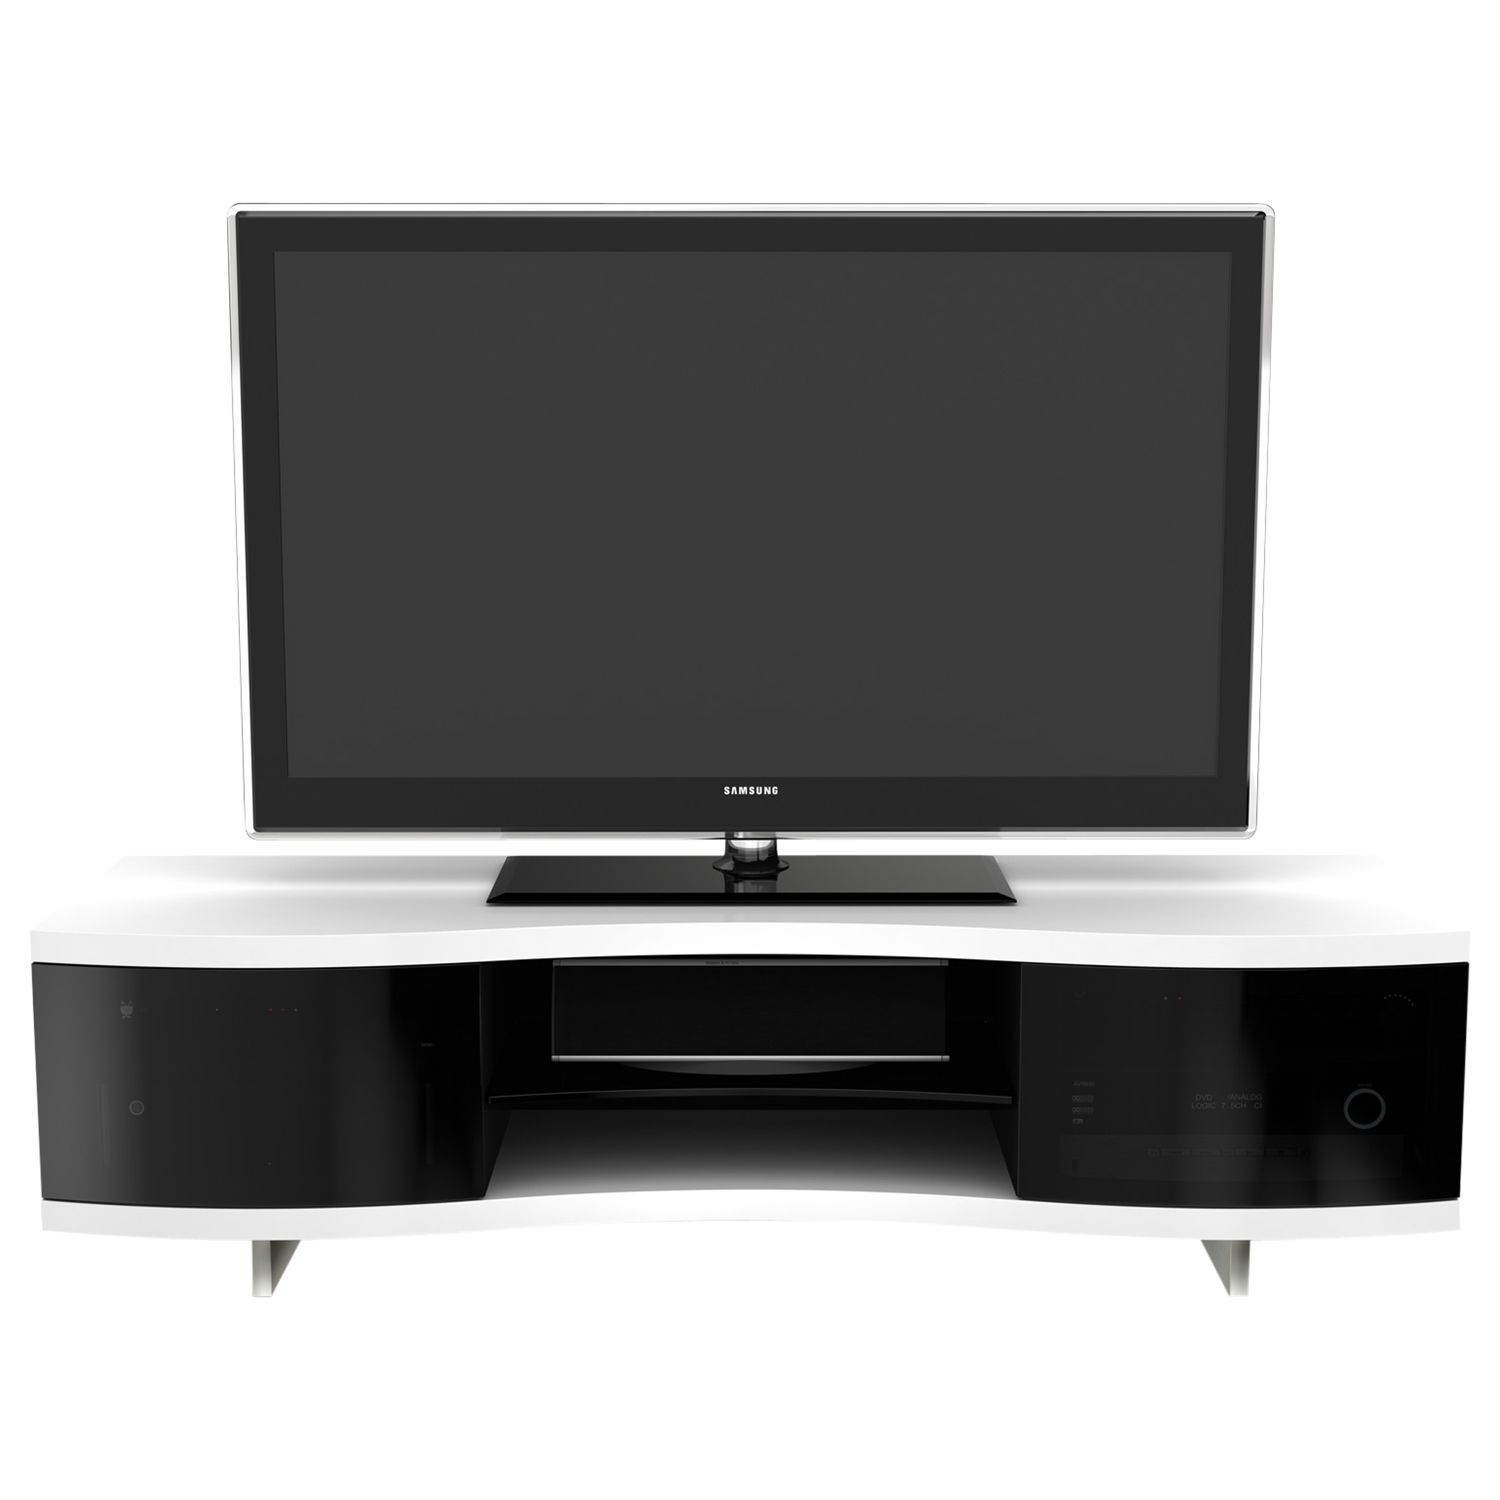 BDI Ola 8137 TV Stand for up to 55-inch TVs, Satin White, width 175cm